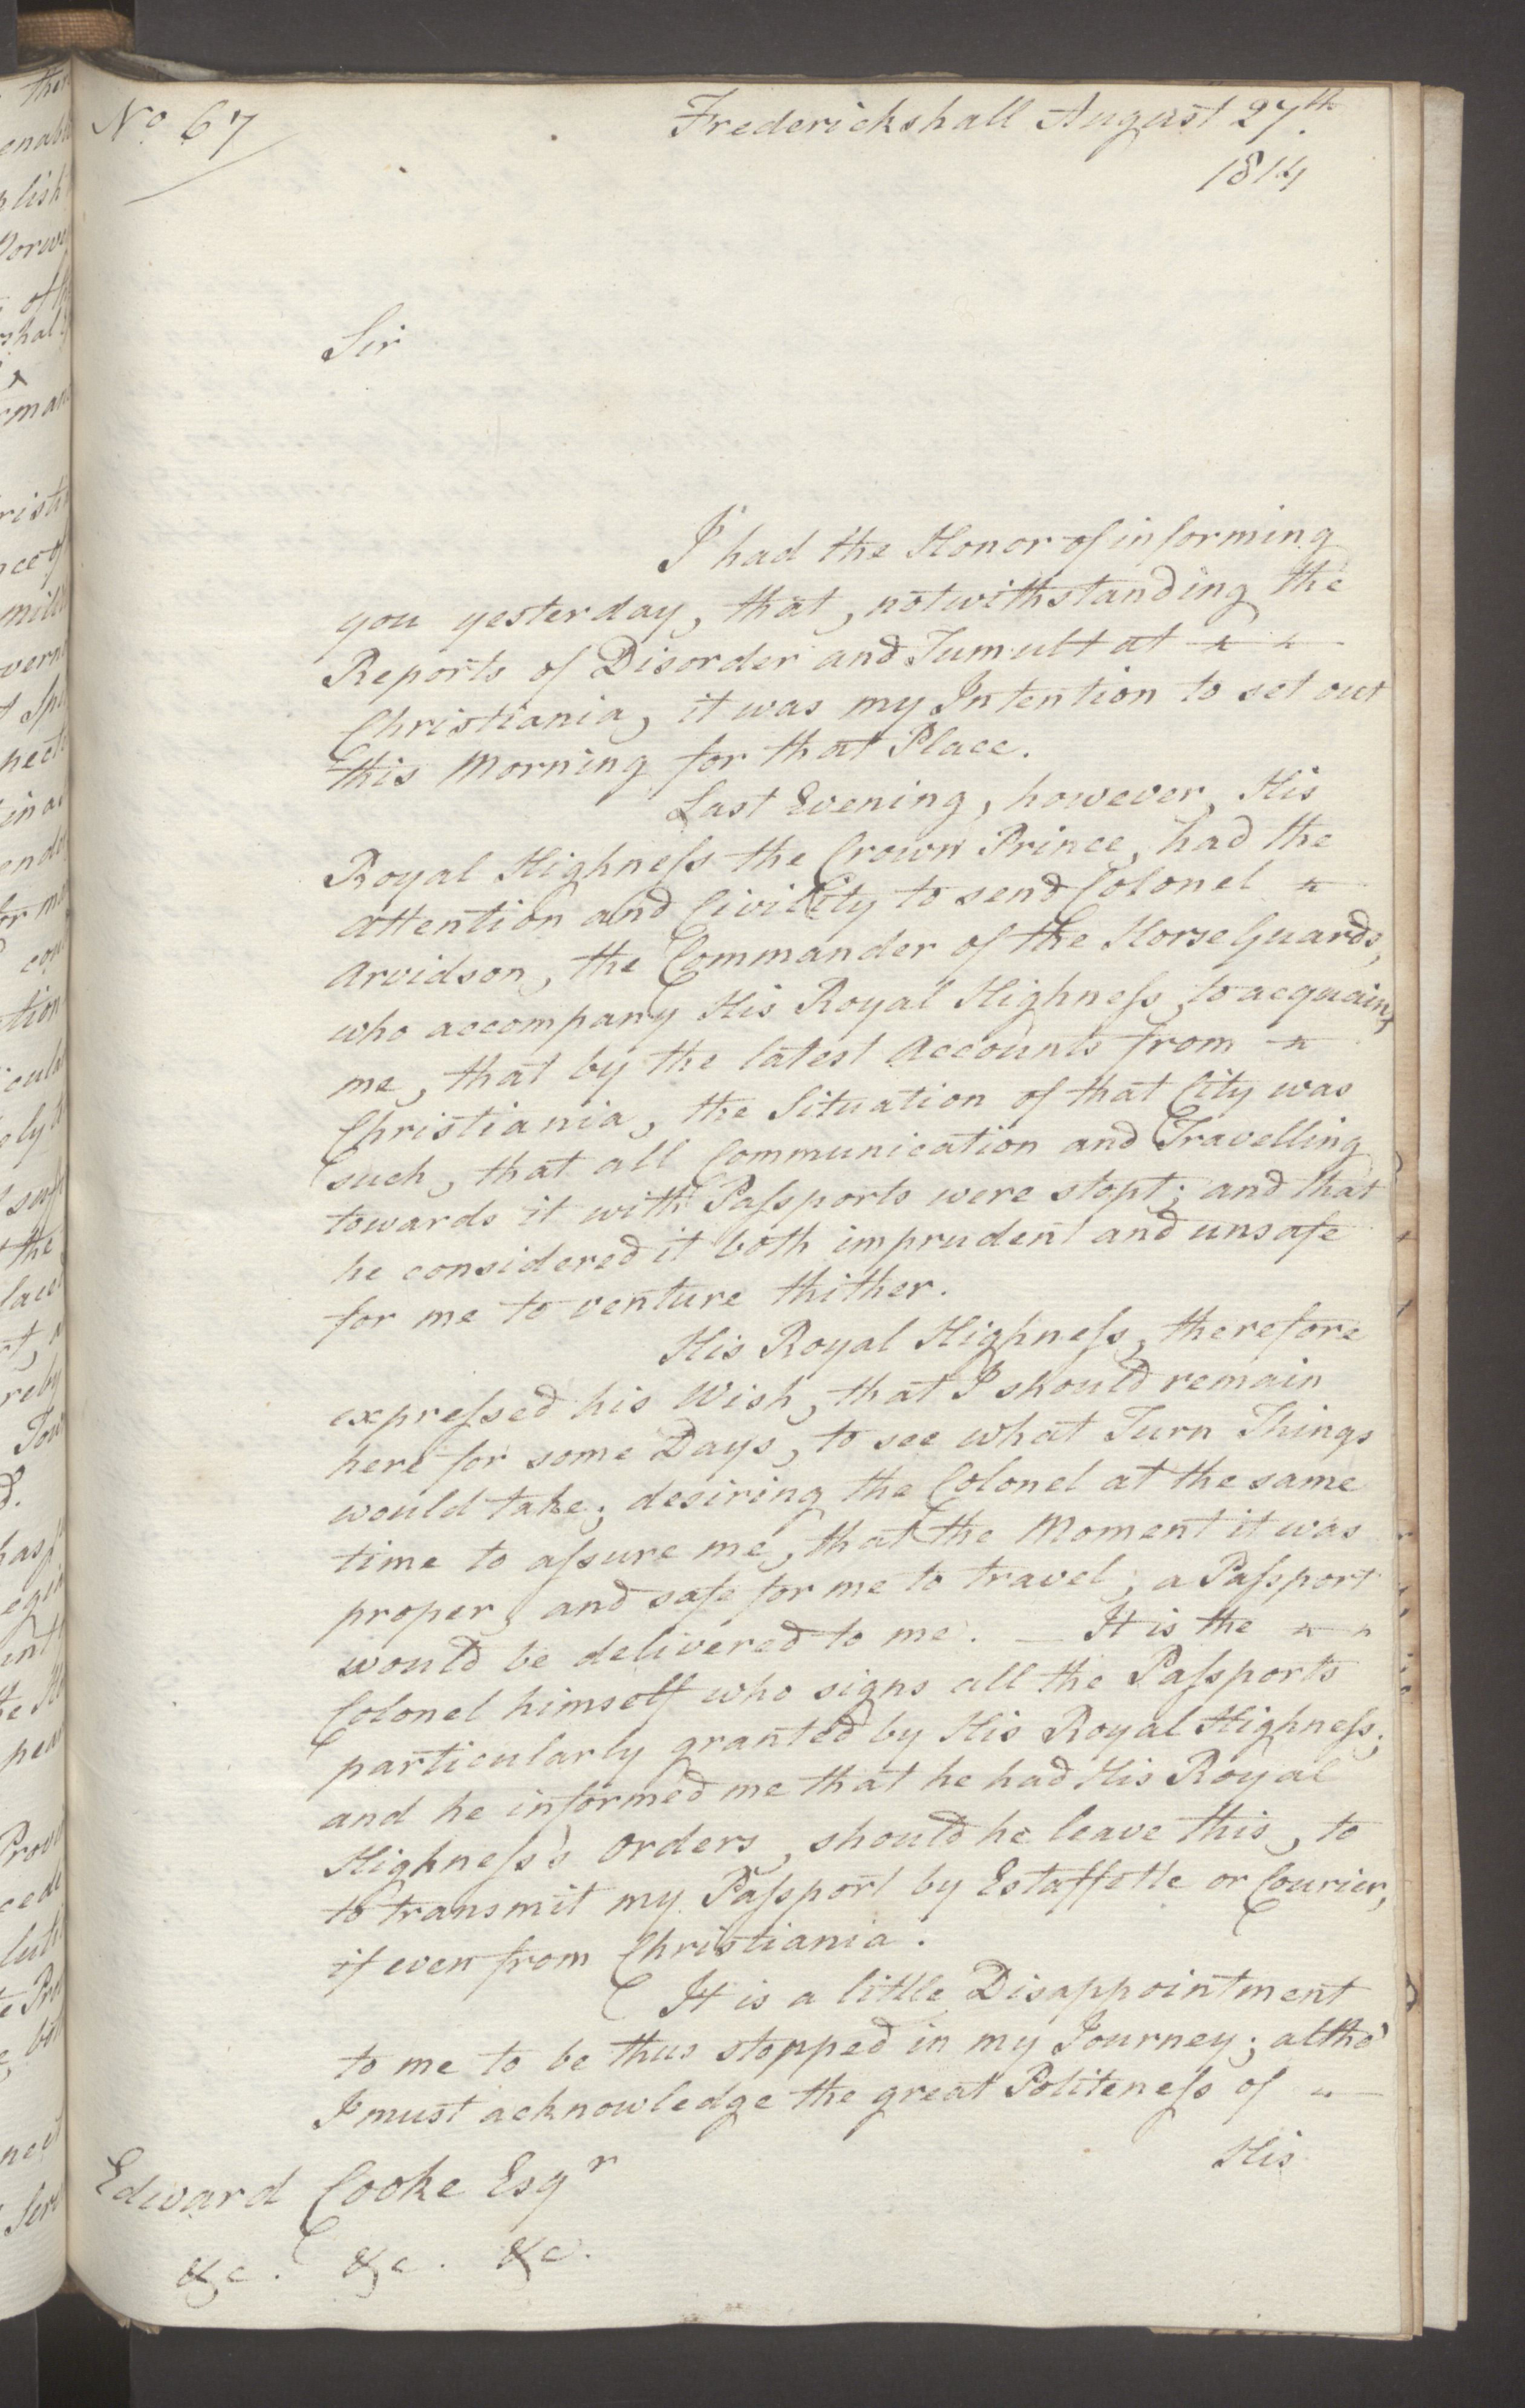 Foreign Office*, UKA/-/FO 38/16: Sir C. Gordon. Reports from Malmö, Jonkoping, and Helsingborg, 1814, s. 99